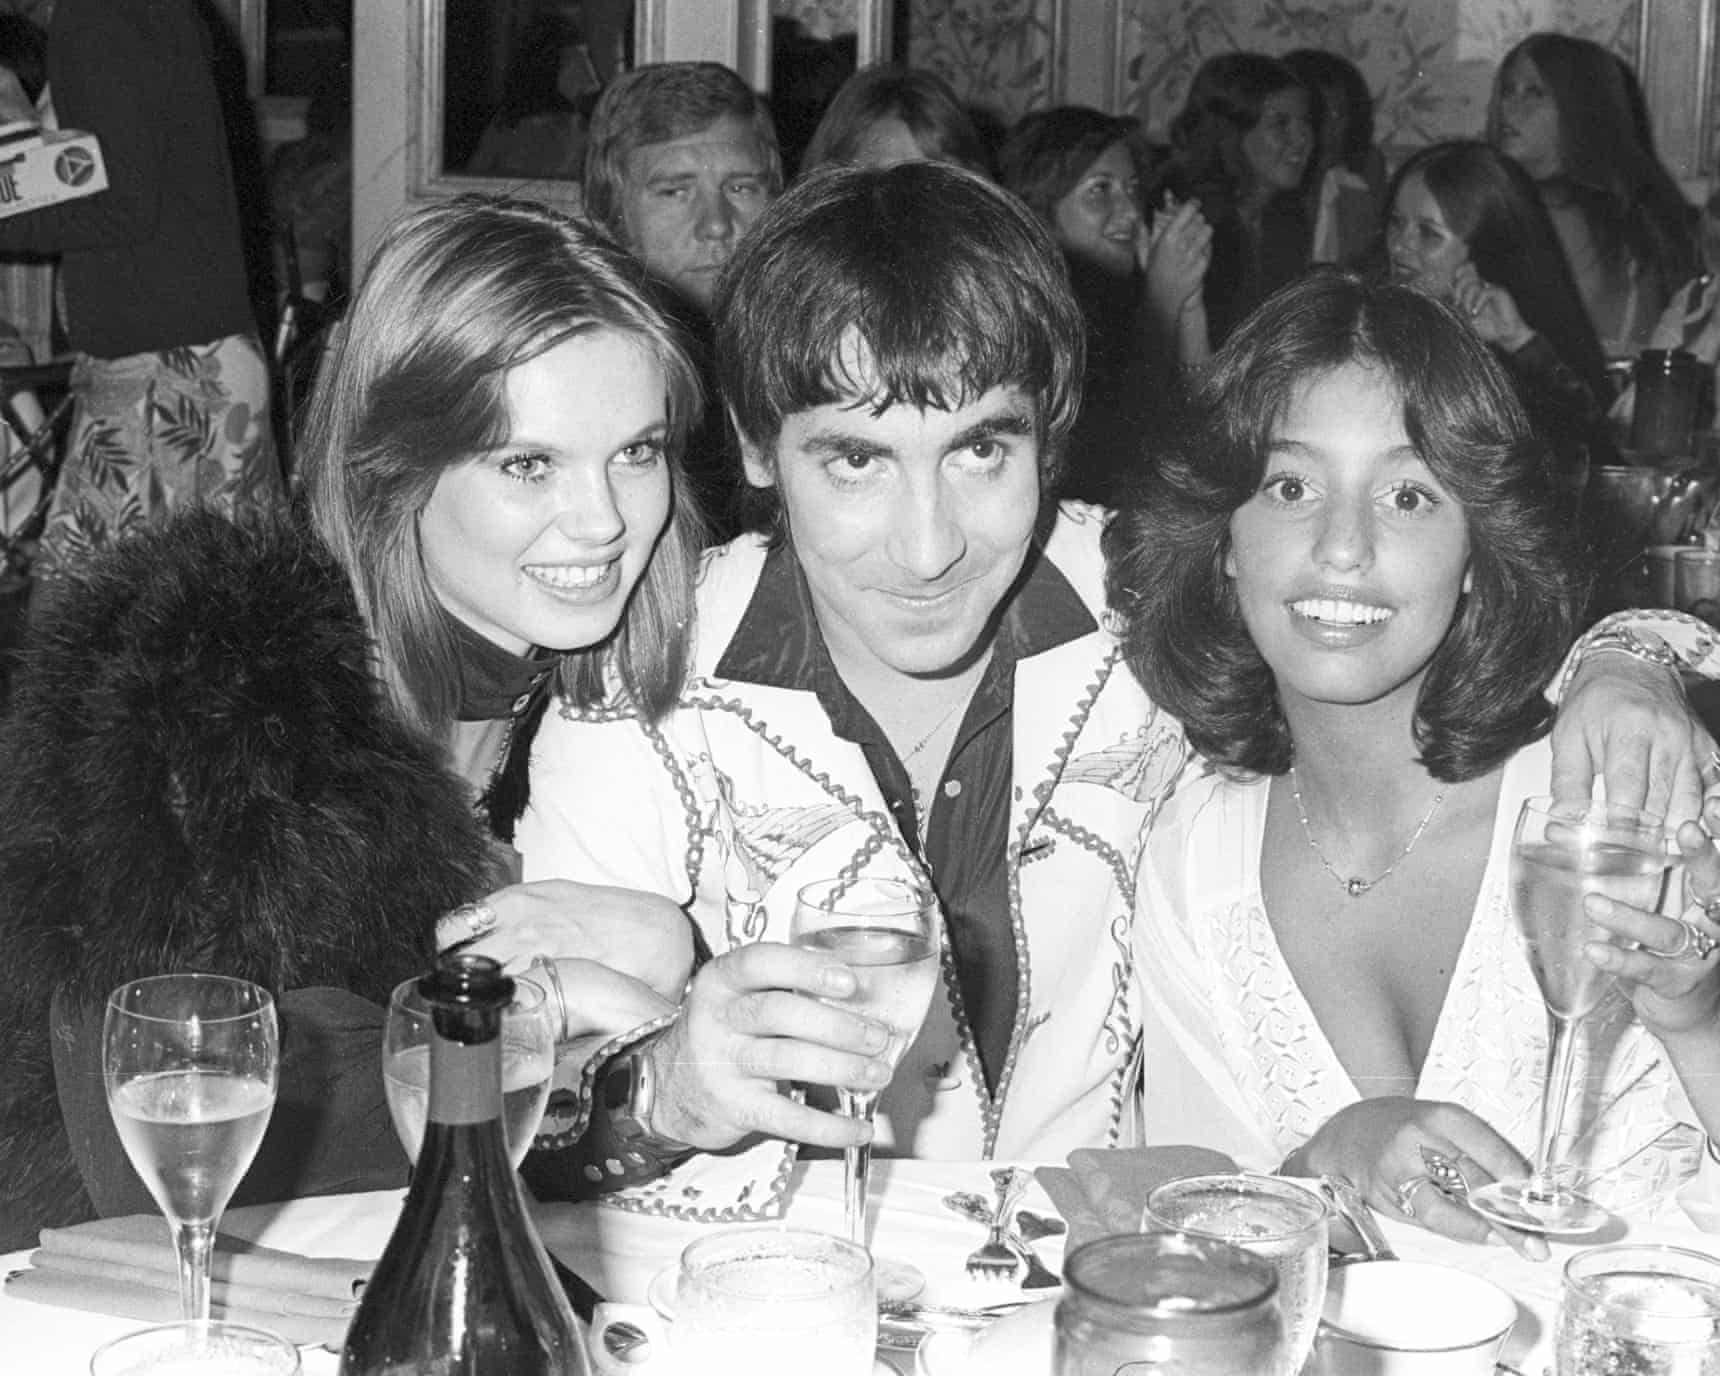 Then theres Keith Moon